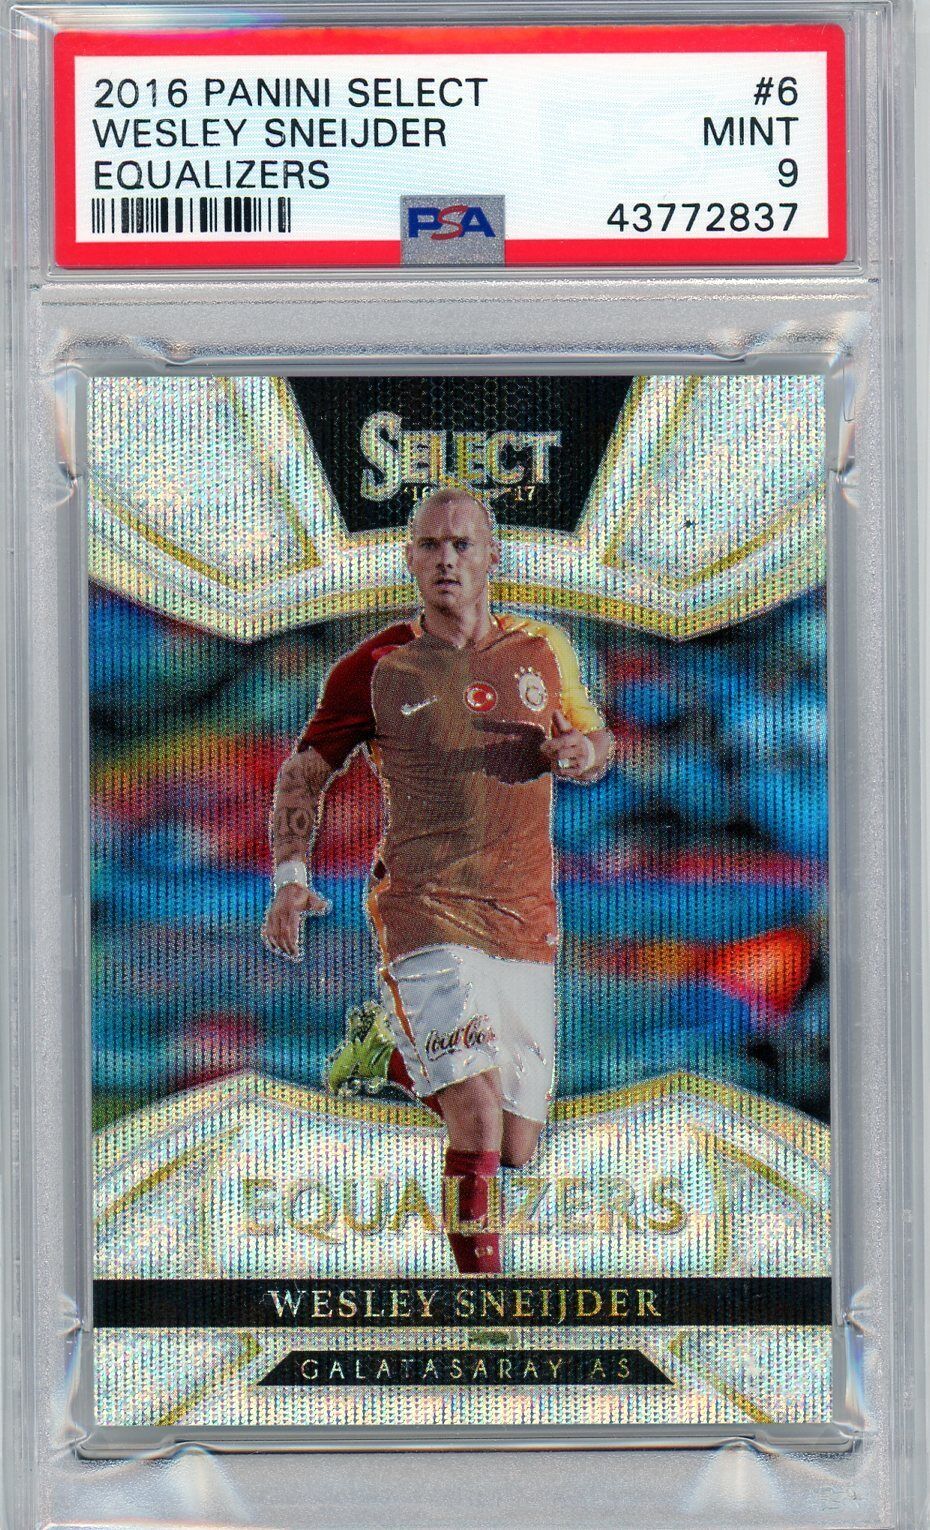 PSA 9 Wesley Sneijder // 2016 Panini Select Equalizers // Galatasaray AS